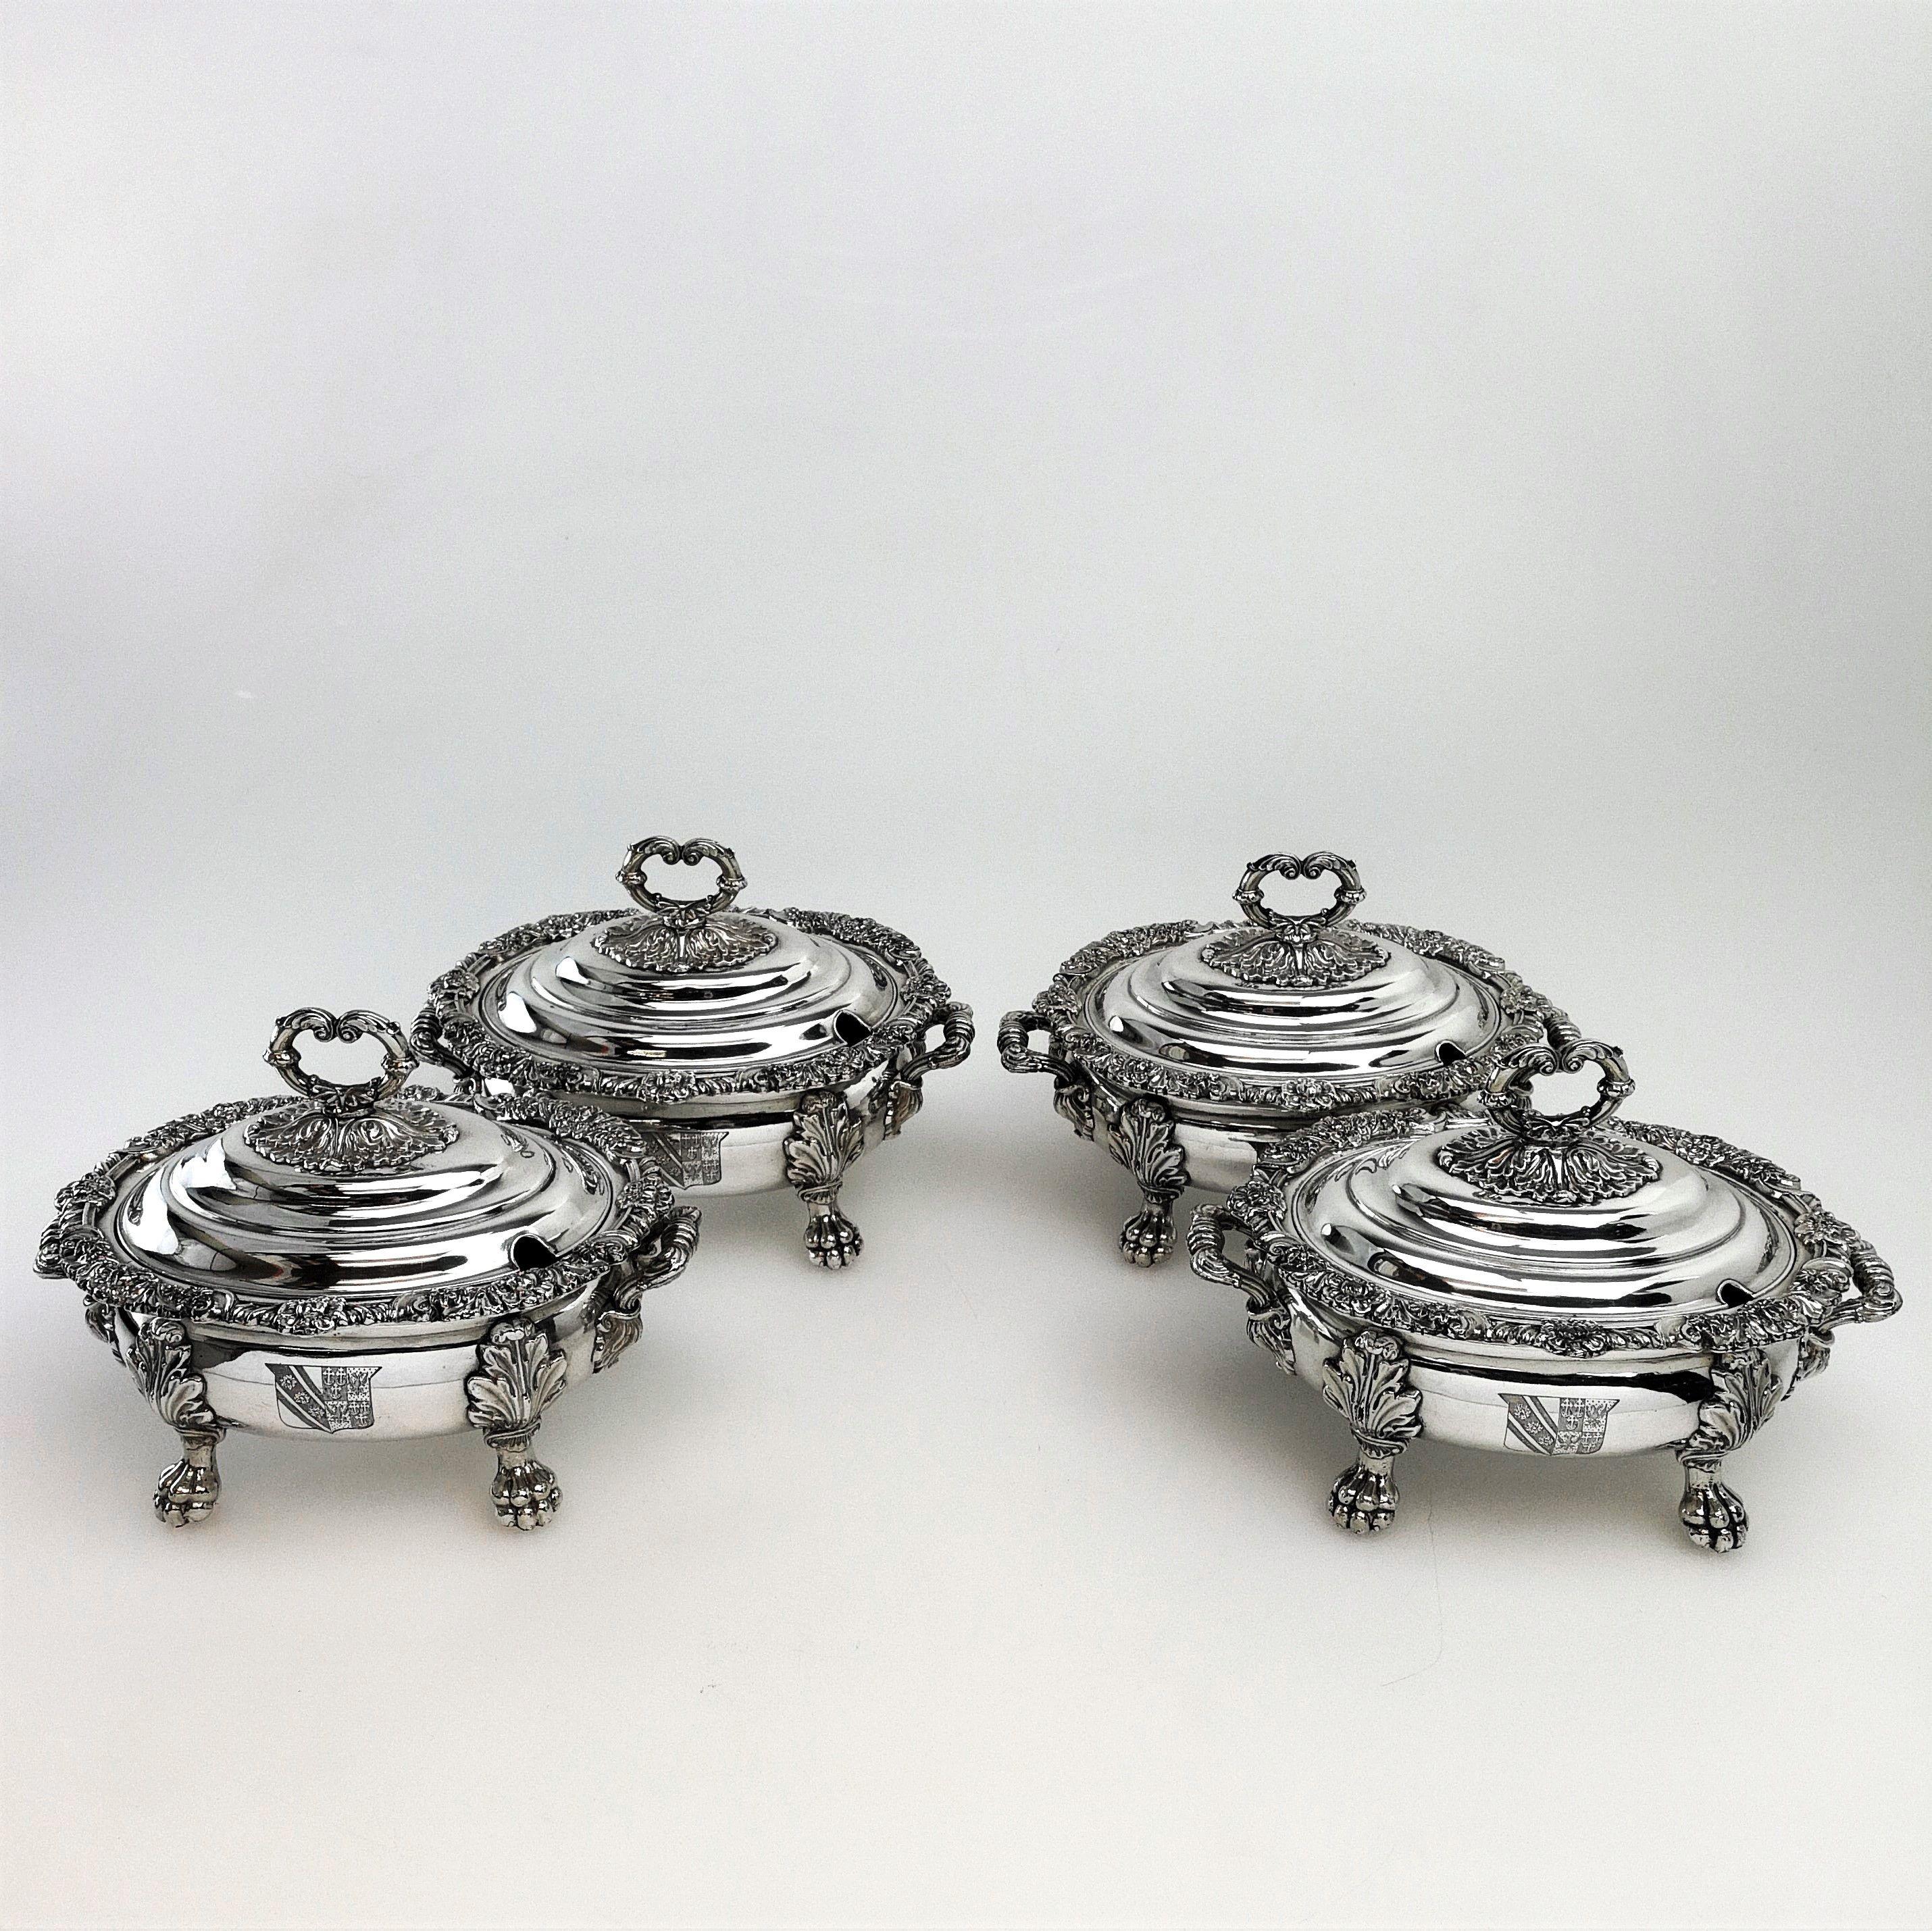 A set of four antique George IV Georgian Old Sheffield Plate Sauce Tureens. These oval Tureens each Stand on four impressive claw feet and have domed fitted lids with scroll finials. The Rims of the Tureens are embellished with a floral and scroll